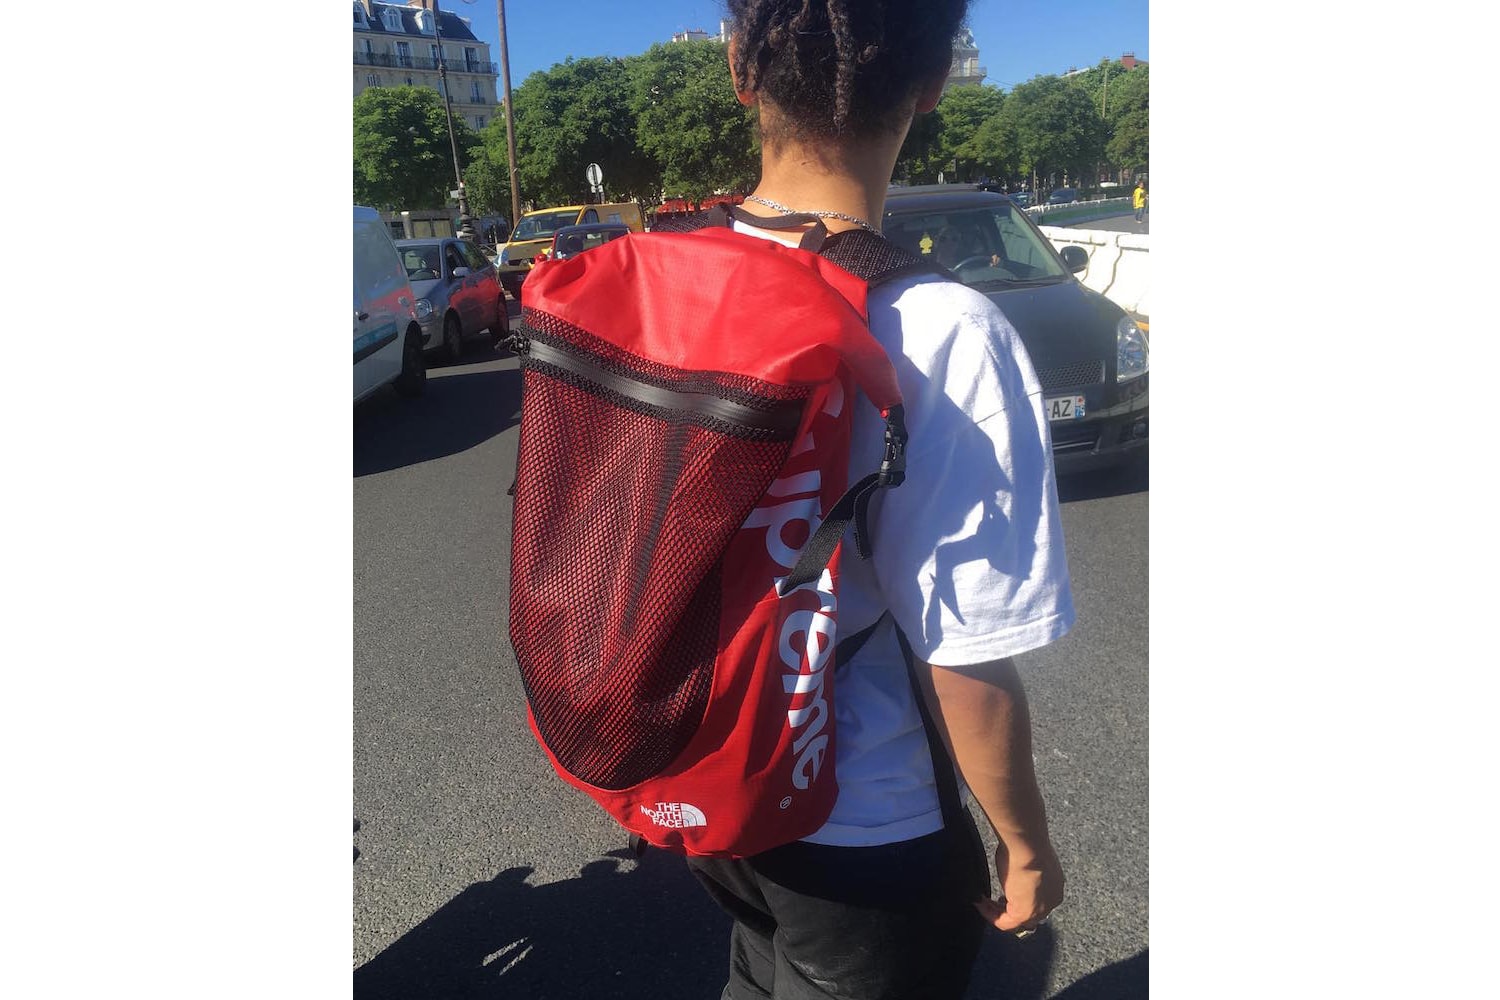 Supreme x The North Face Waterproof Backpack & Waist Bag